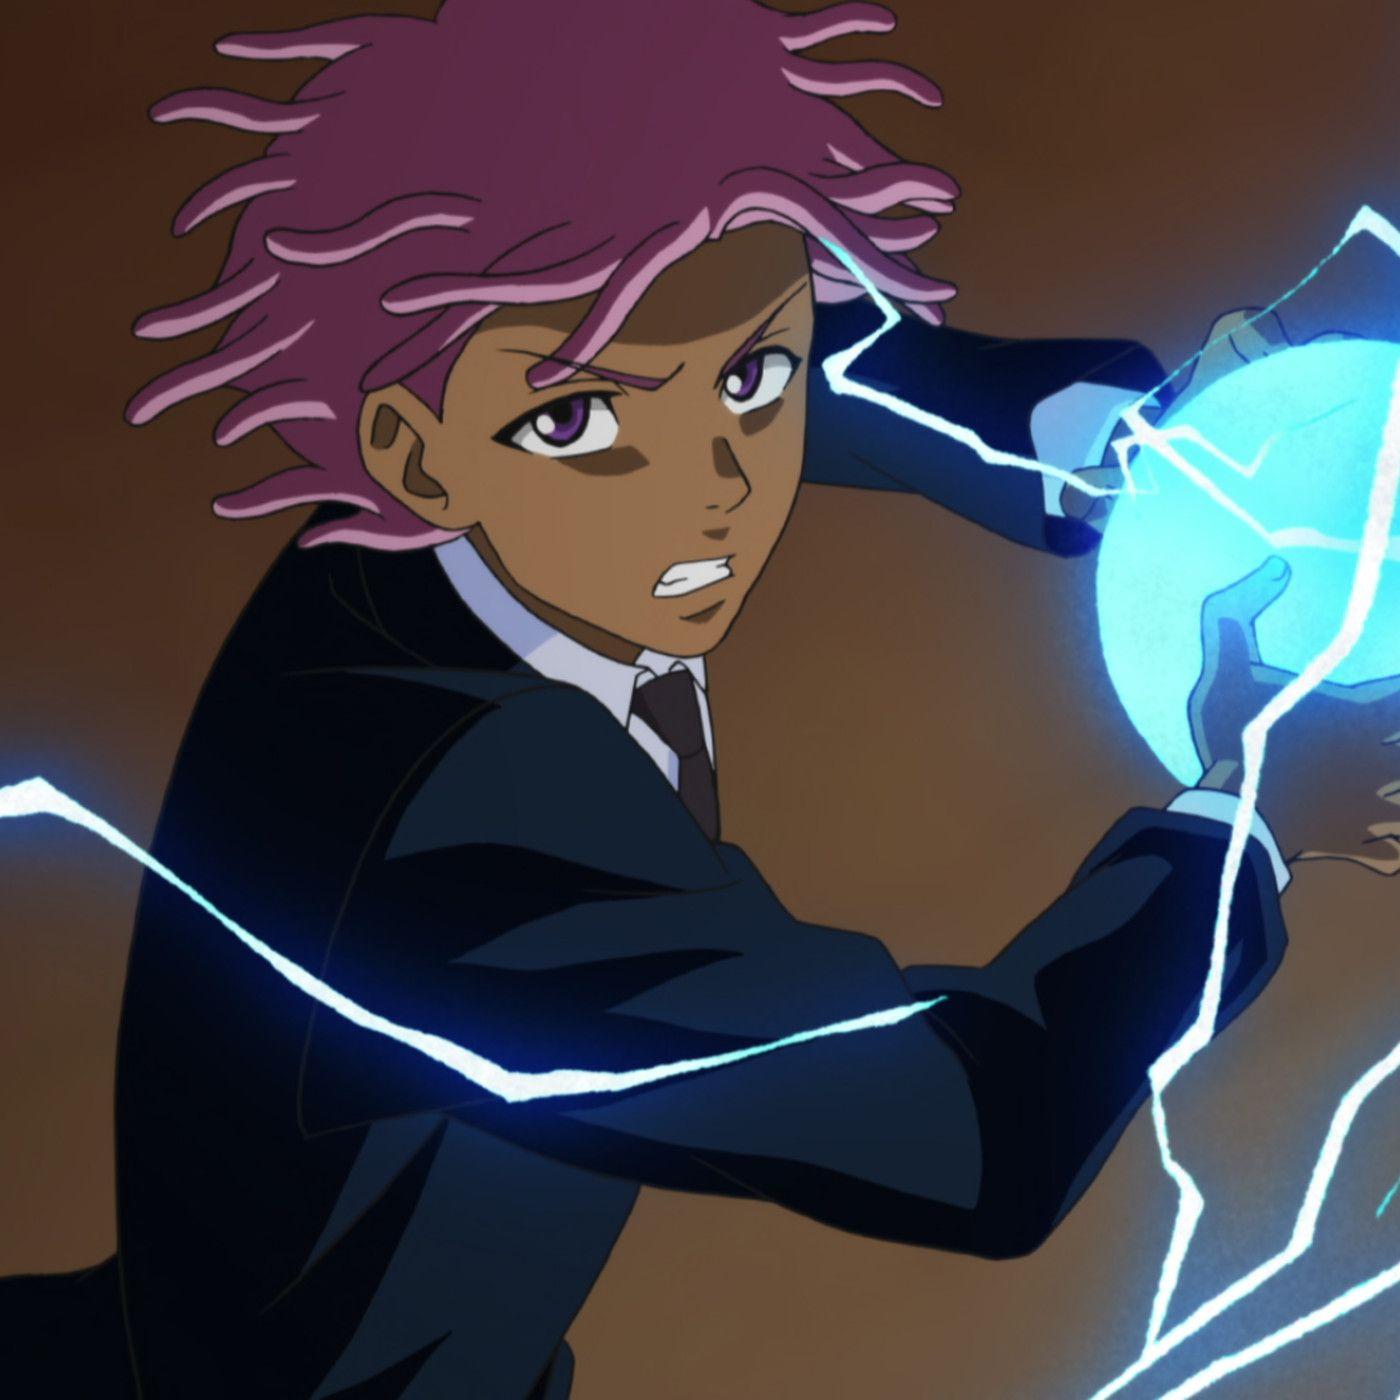 New trailers: Neo Yokio, Mudbound, The Current War, and more